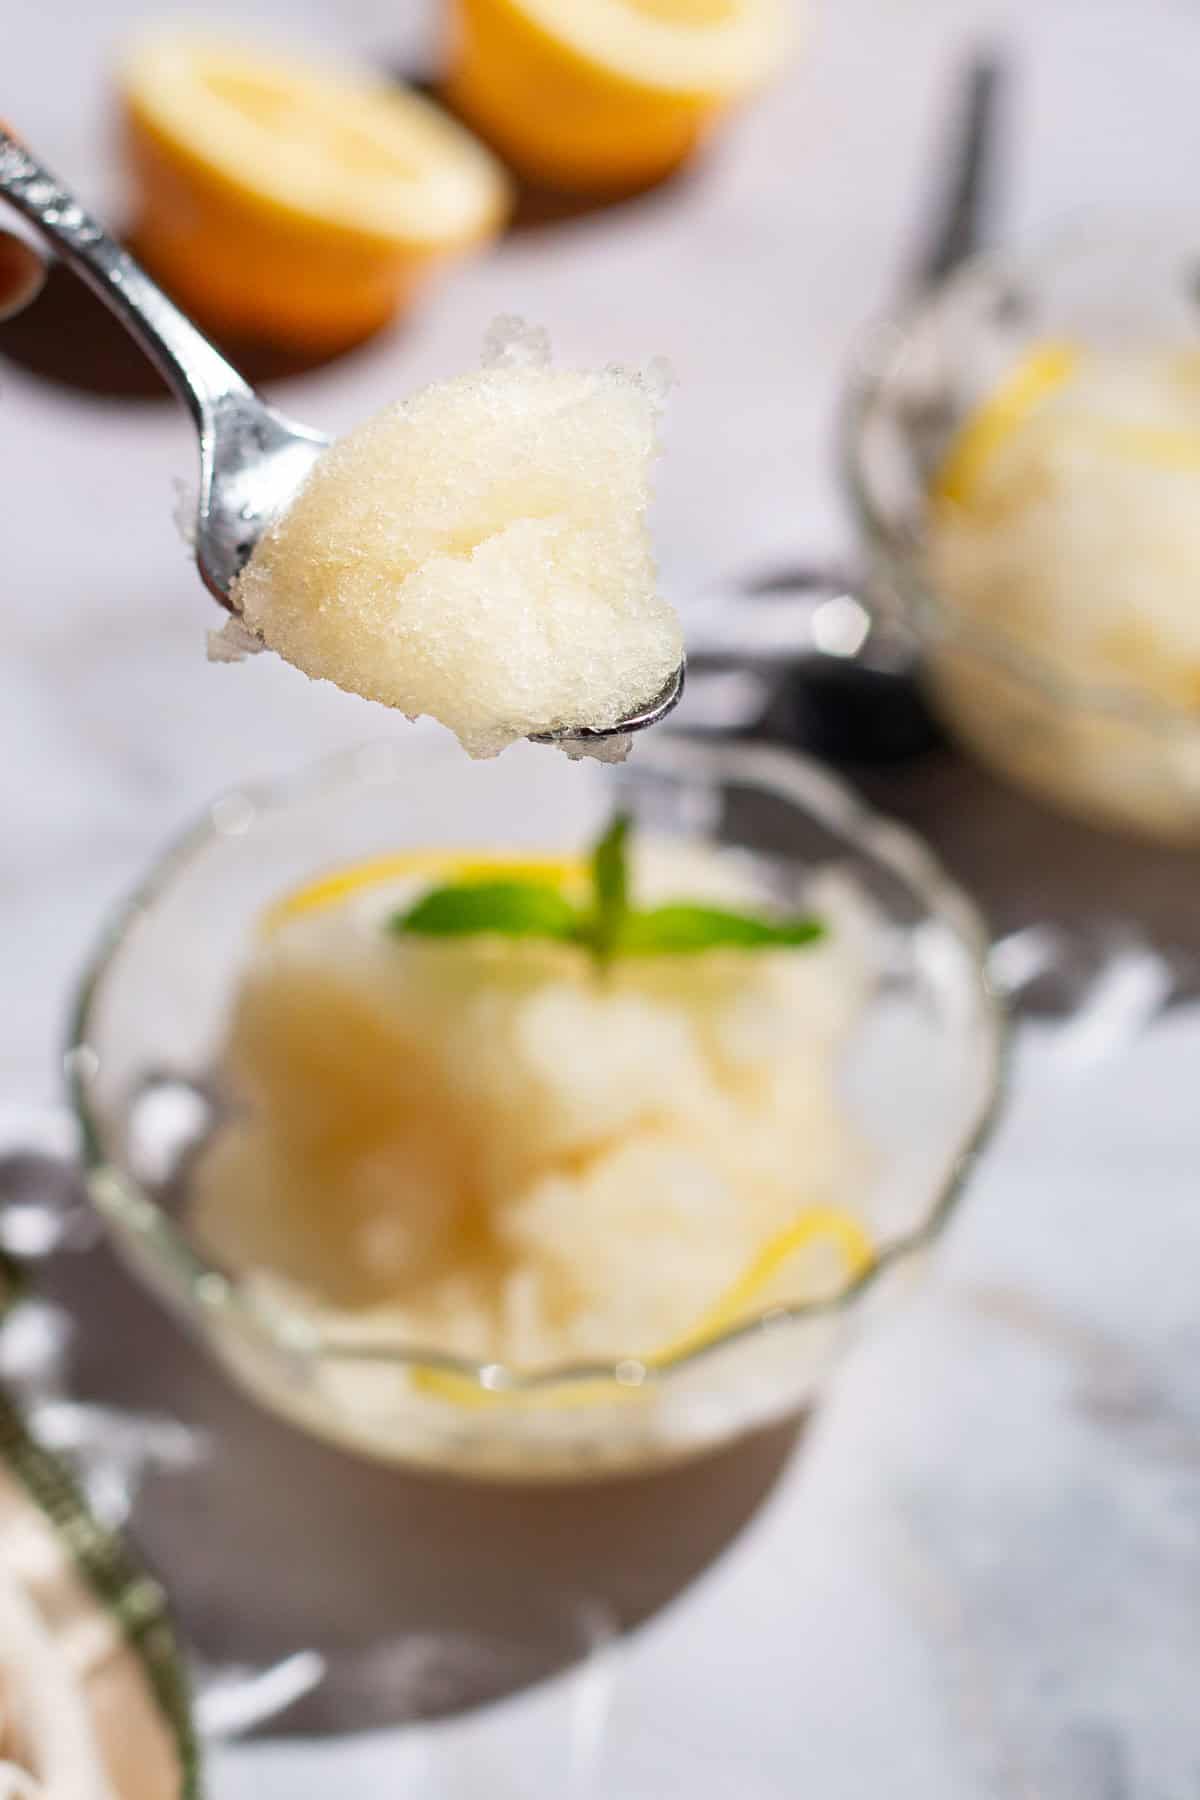 A close up of a spoonful of lemon sorbet with two bowls of sorbet and 2 lemon halve in the background.